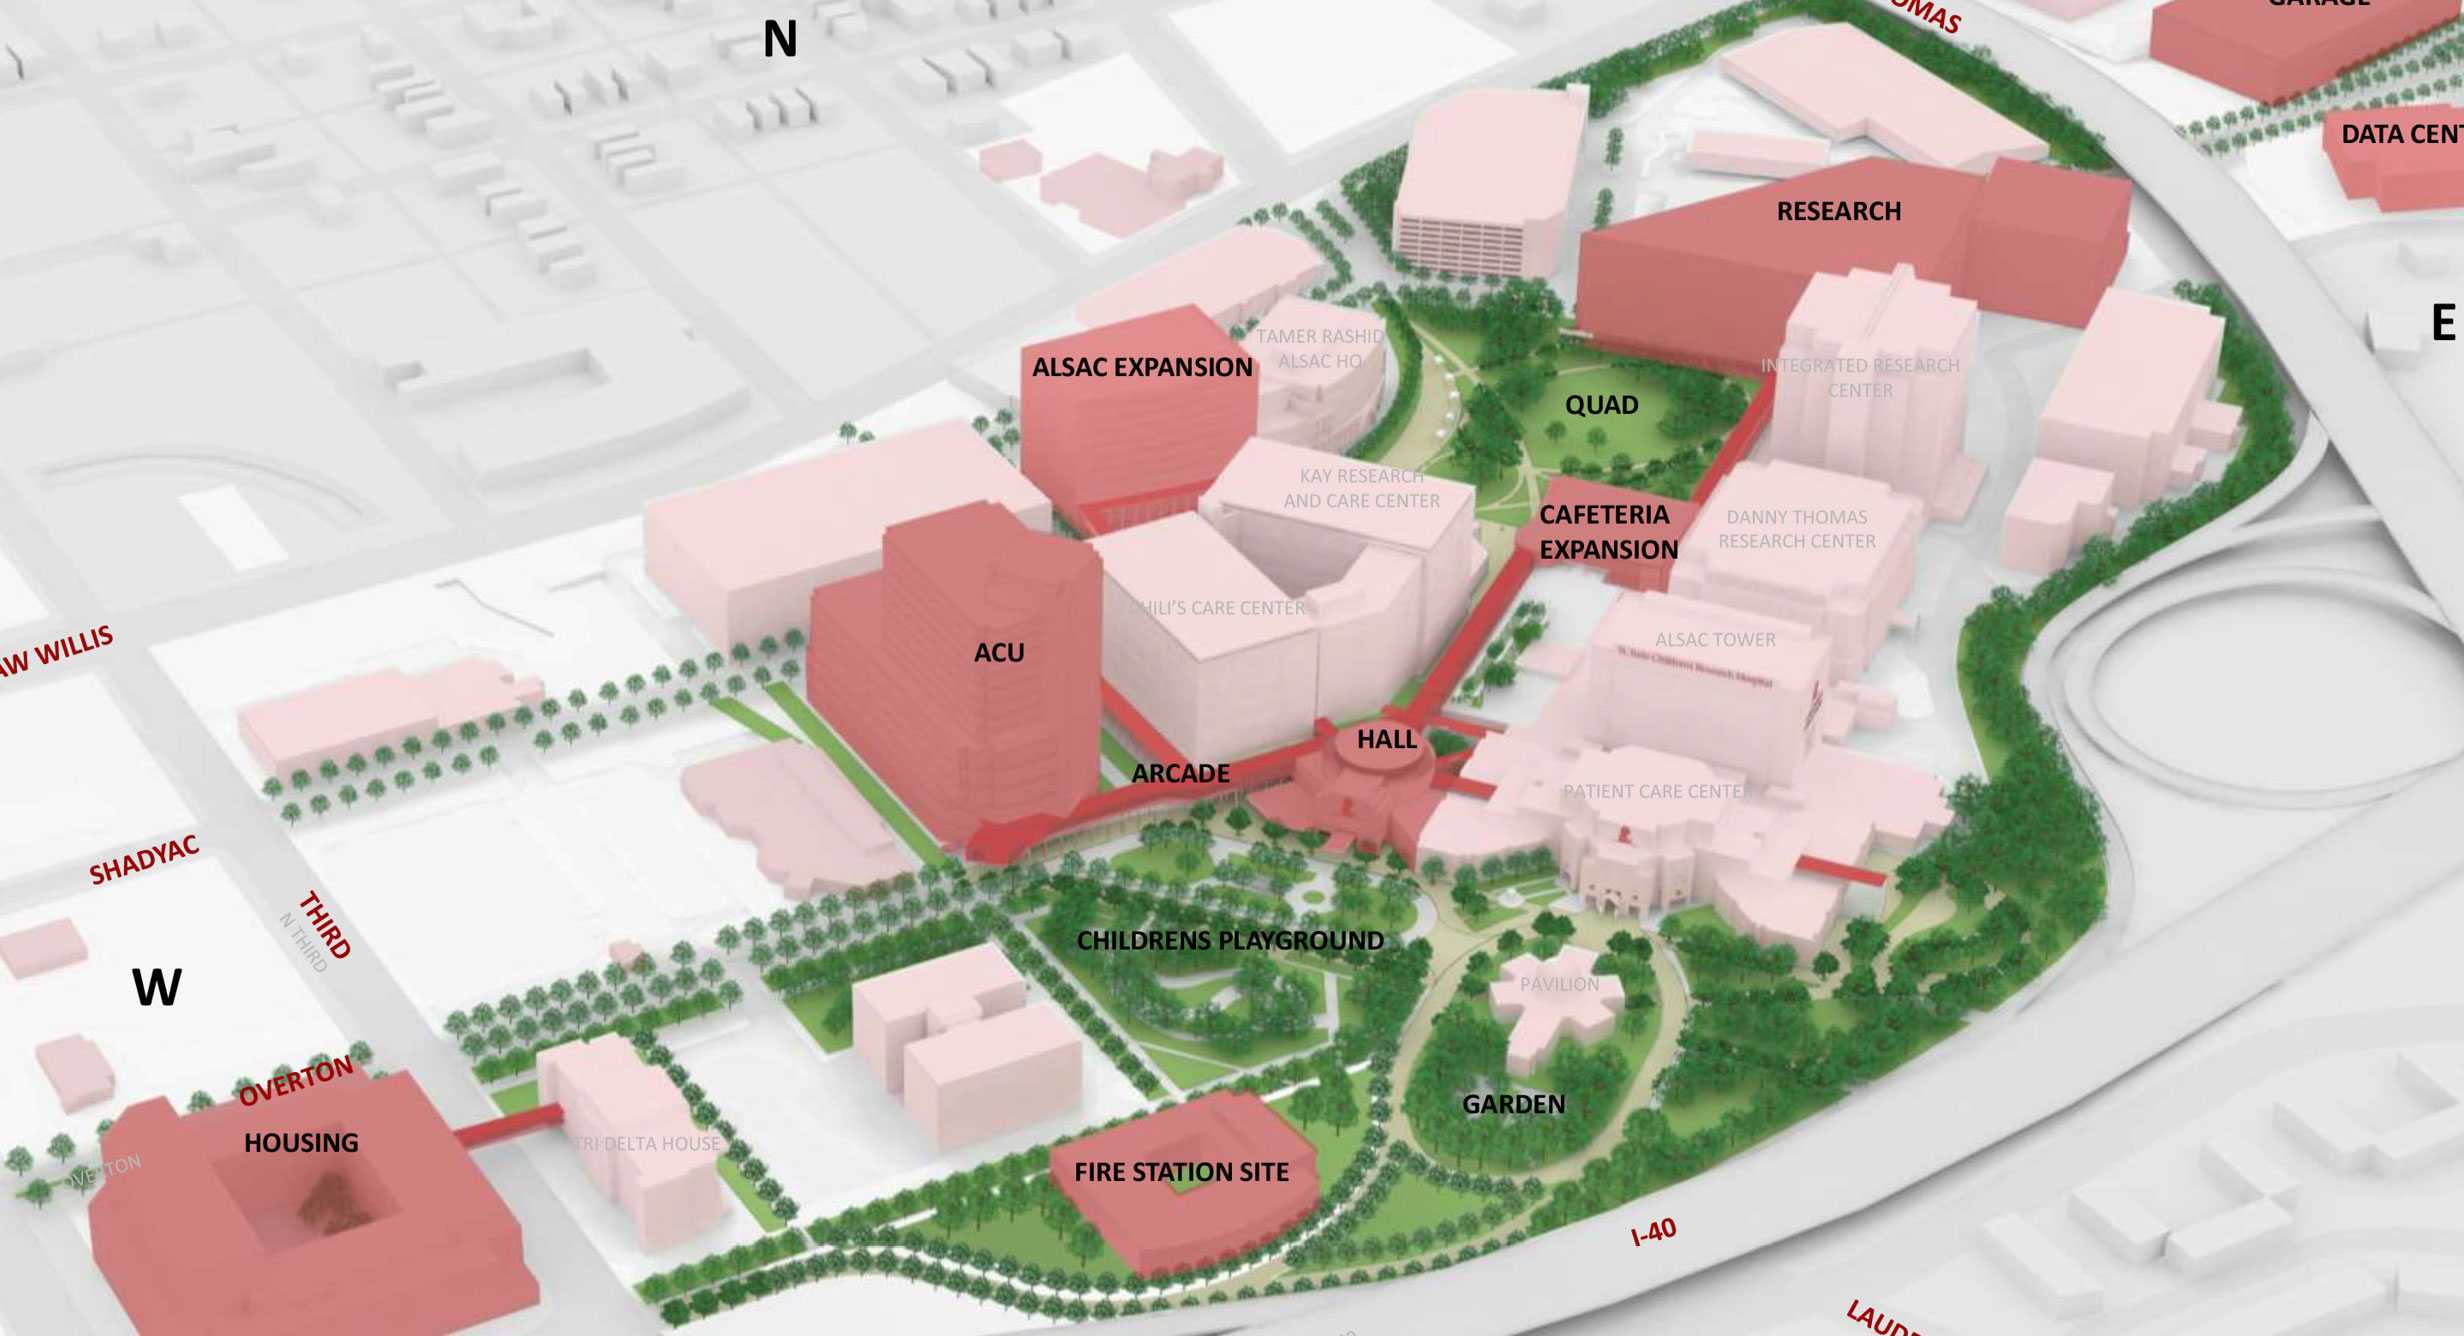 St. Jude Children’s Research Hospital Master Site & Facilities Plan